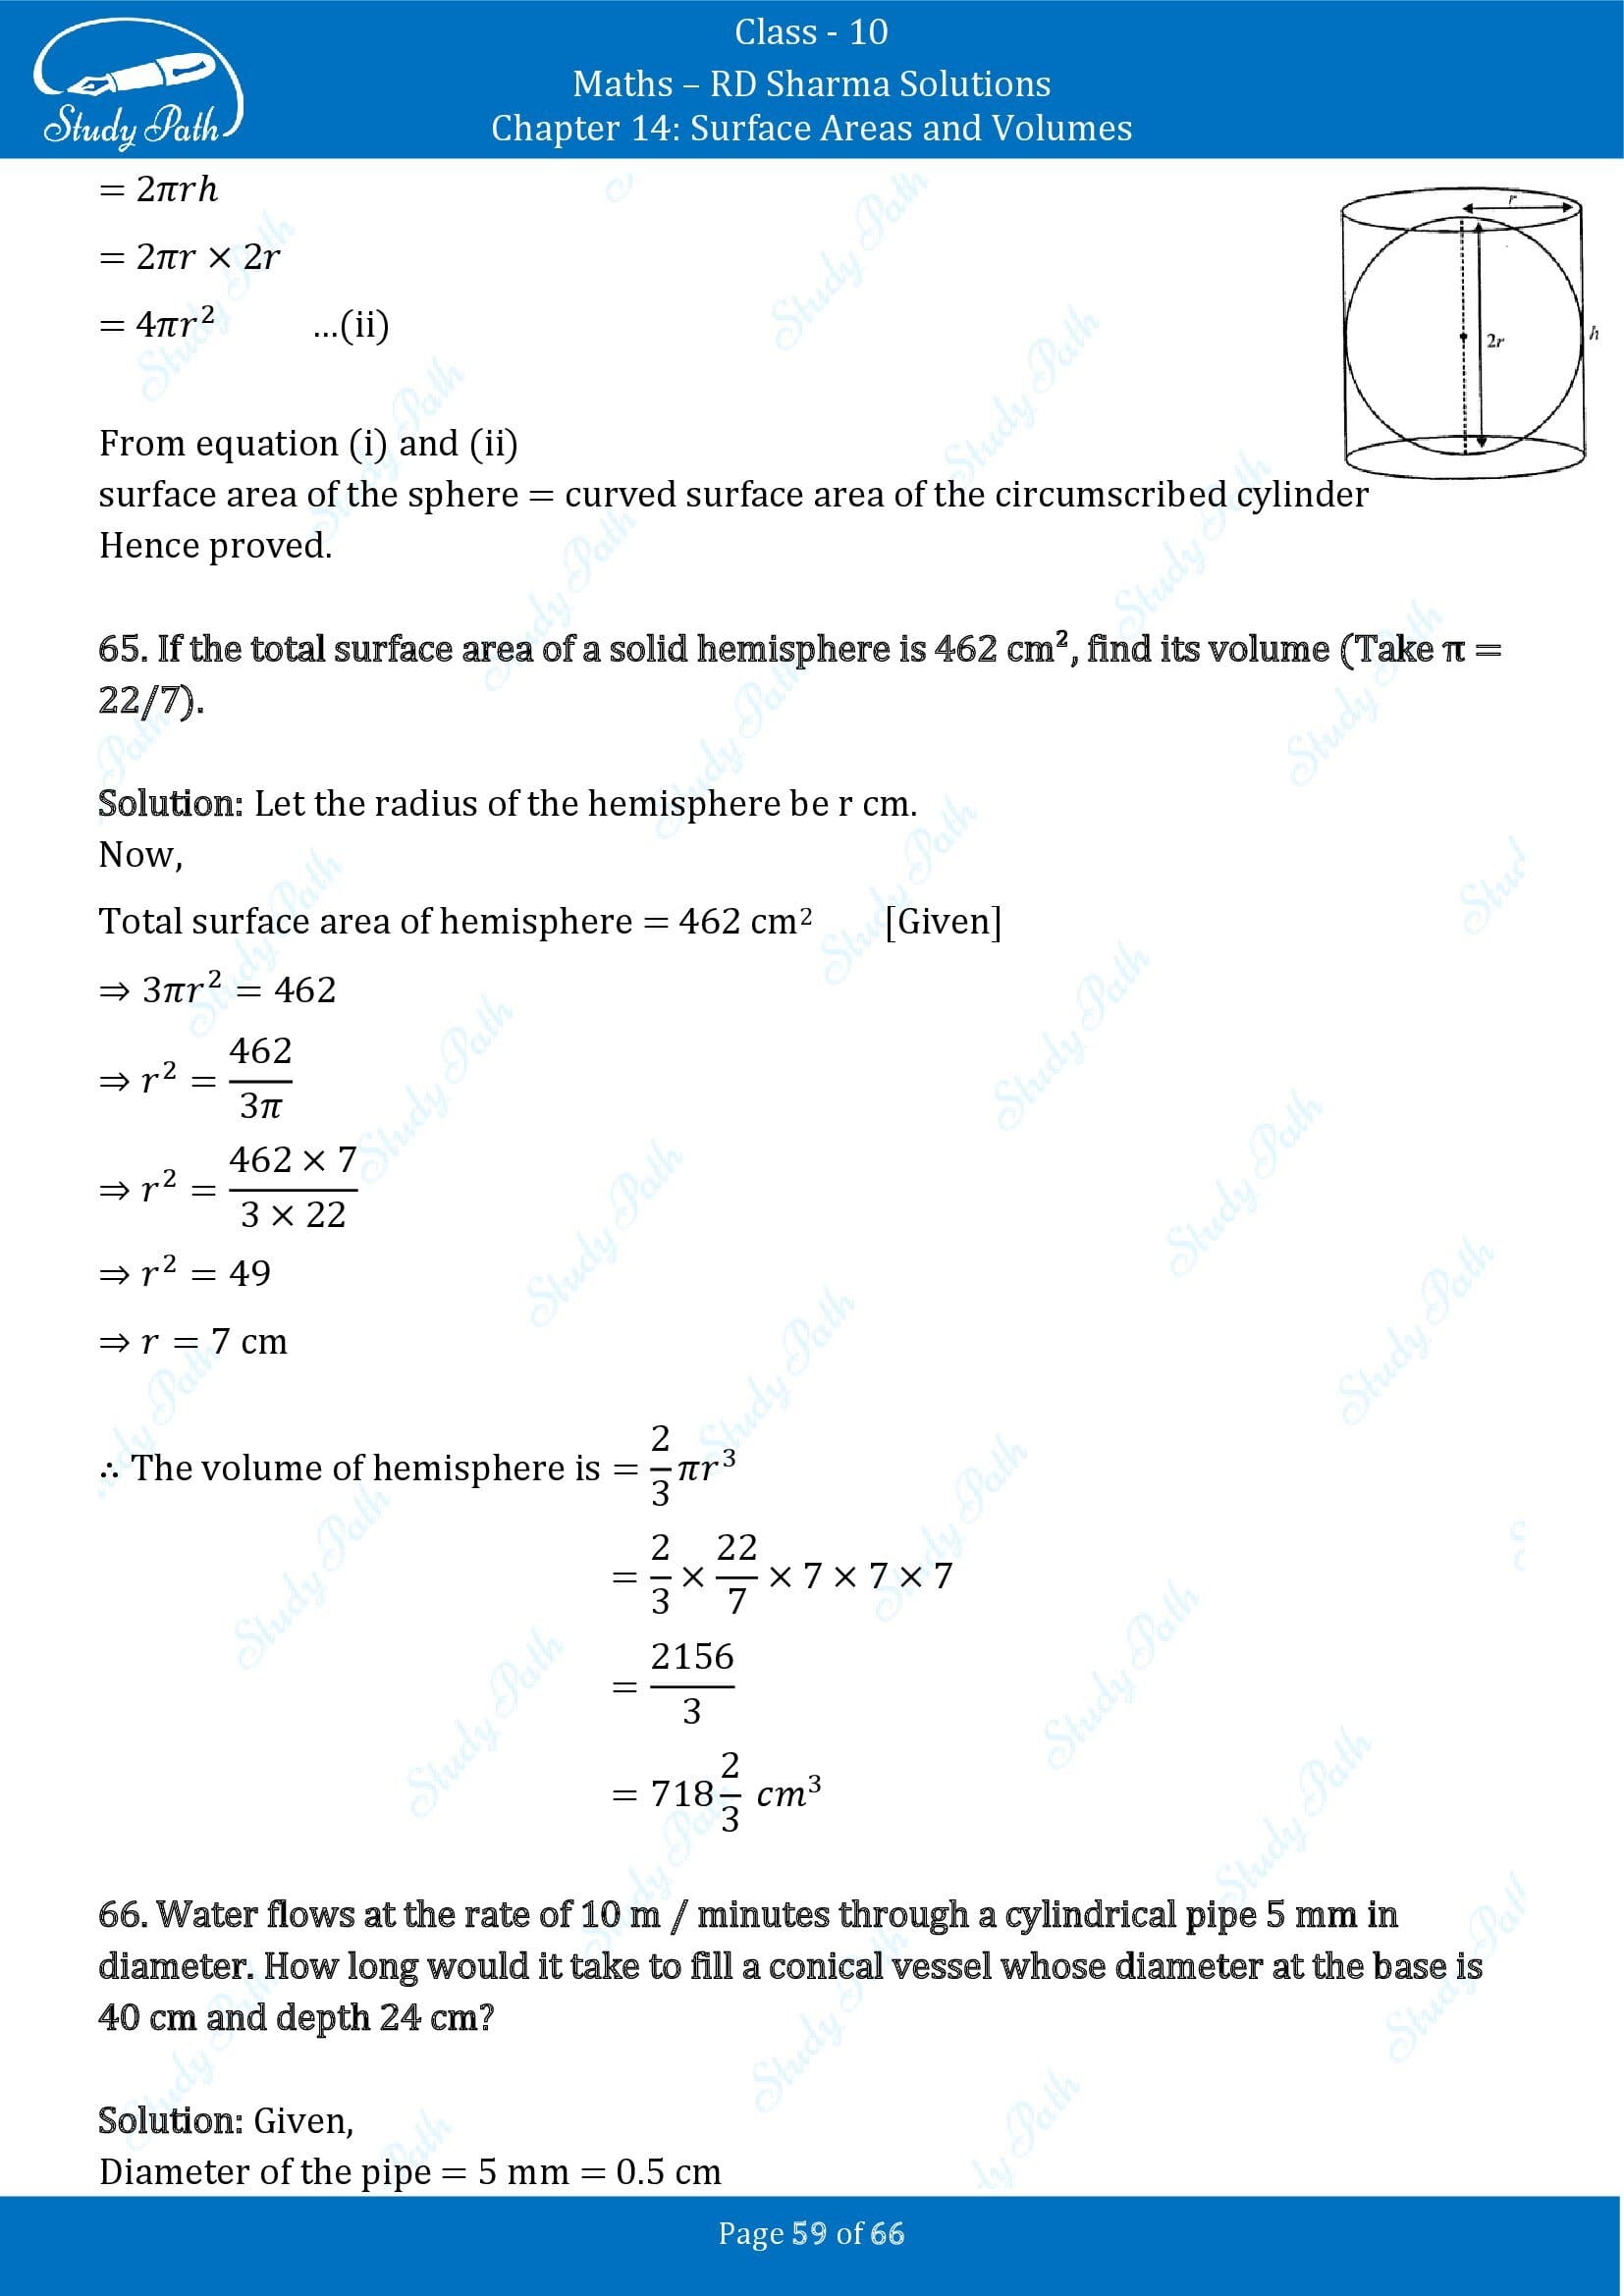 RD Sharma Solutions Class 10 Chapter 14 Surface Areas and Volumes Exercise 14.1 00059